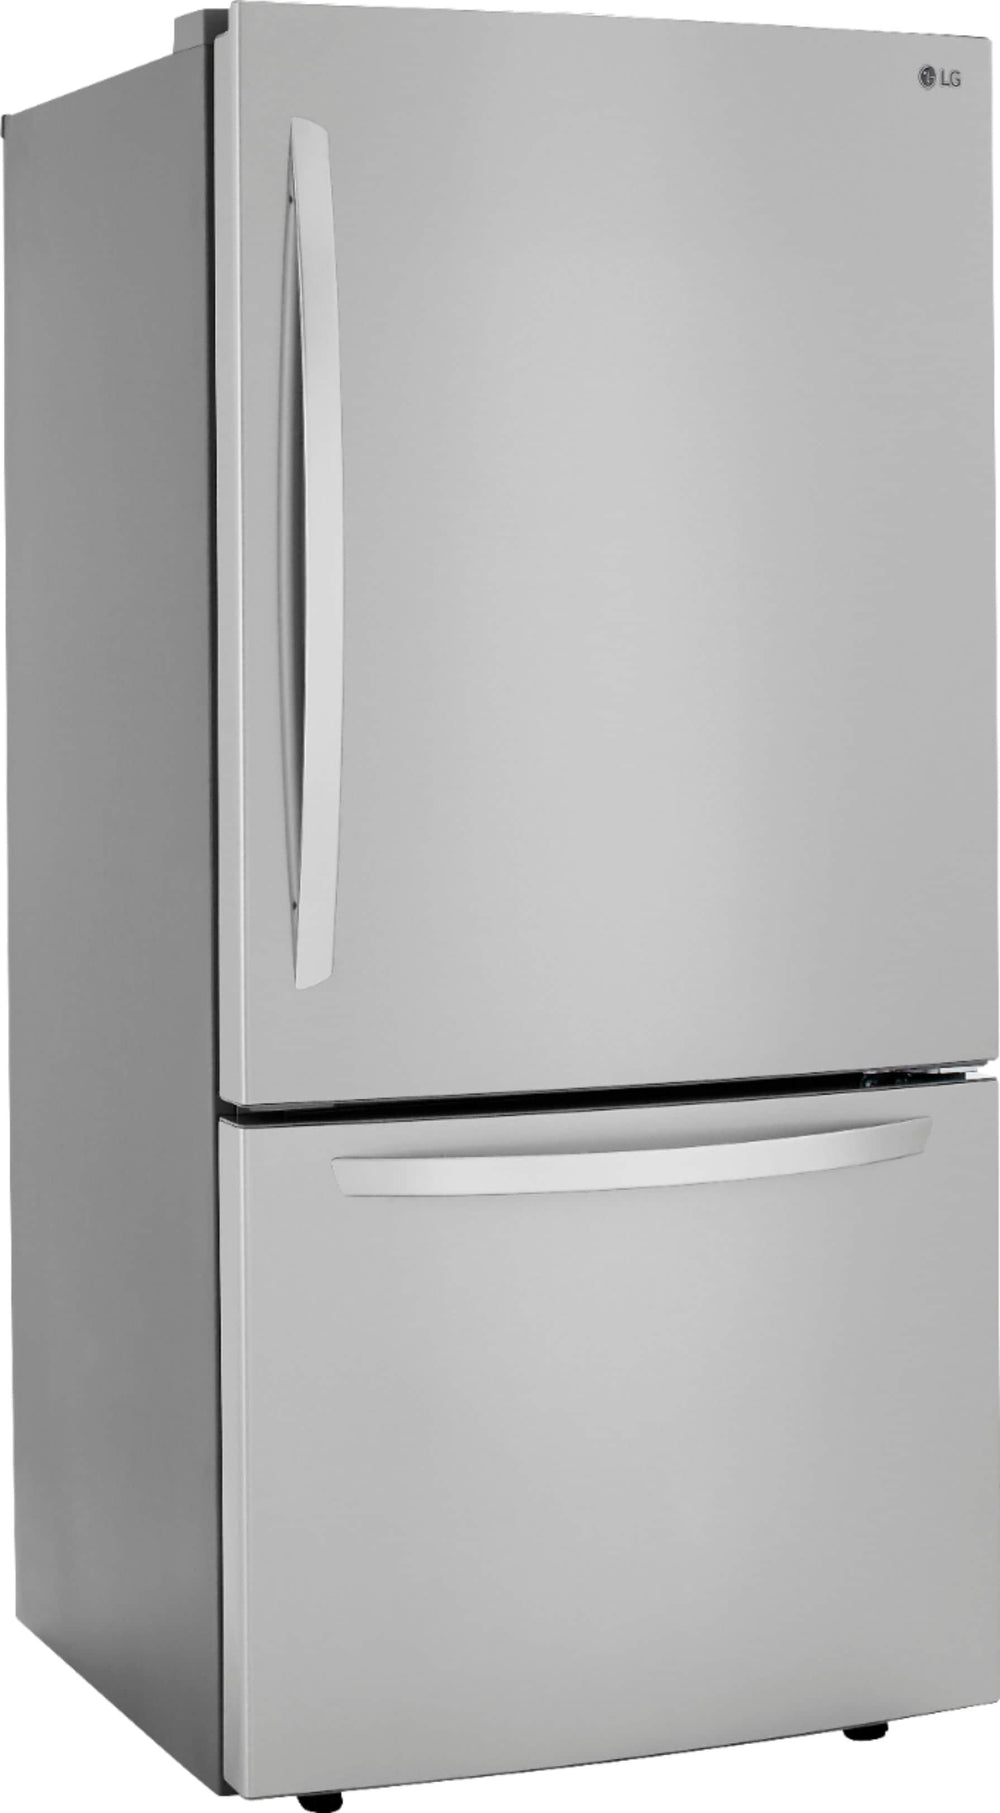 LG - 25.5 Cu. Ft. Bottom-Freezer Refrigerator with Ice Maker - Stainless steel_1